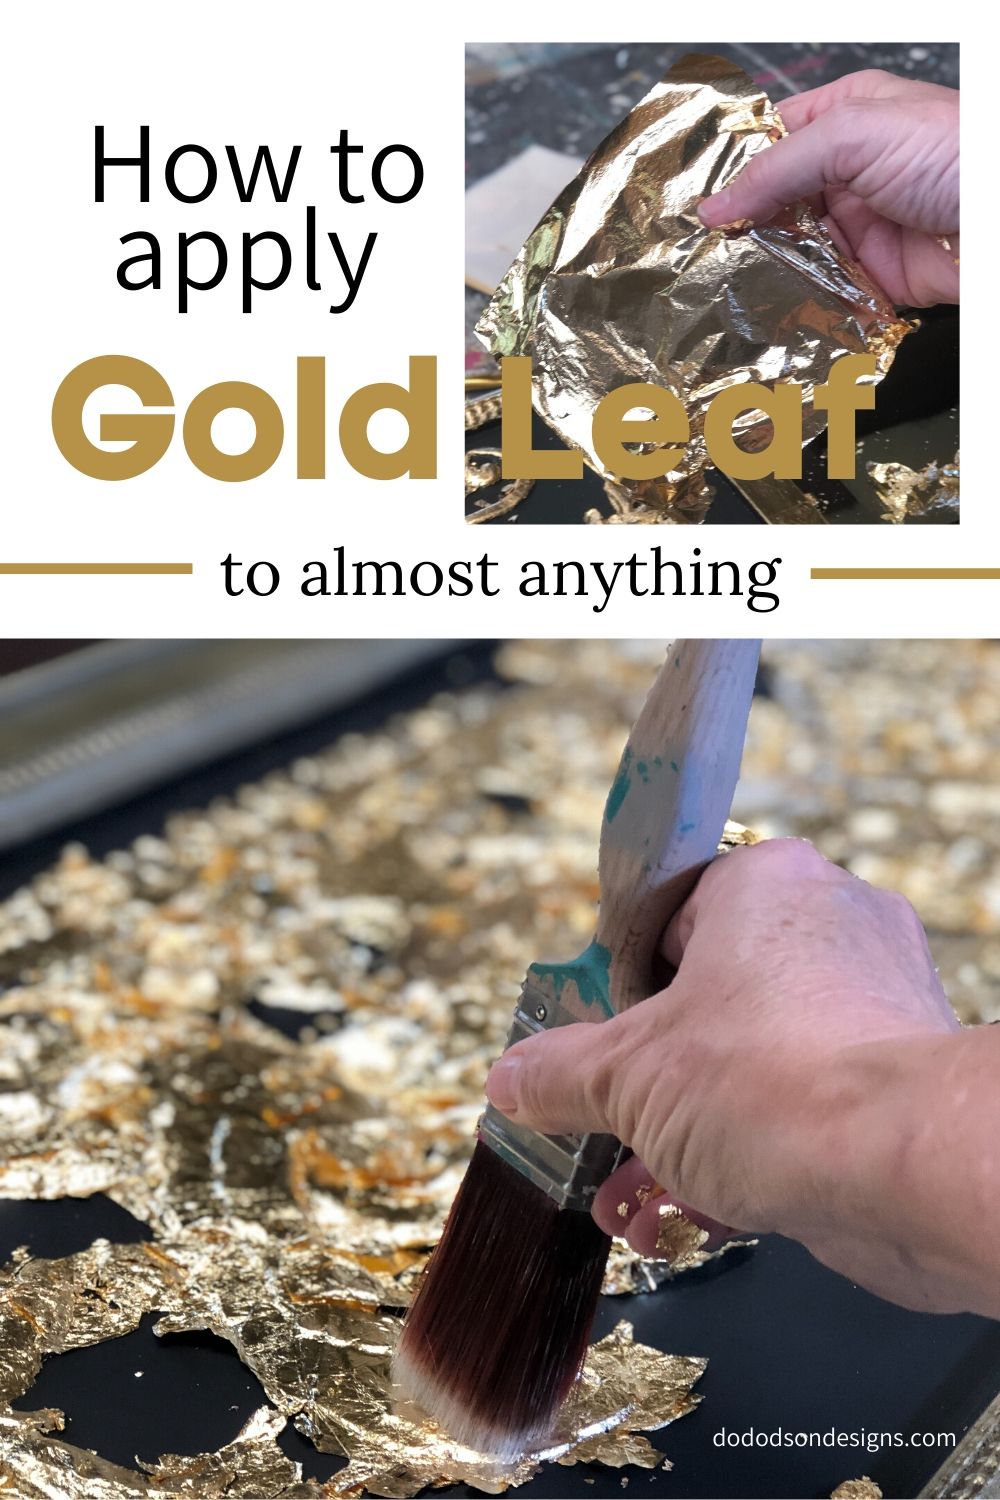 10 Gold Leaf Crafts To Try if You Can't Get Enough Of the Shiny Mineral